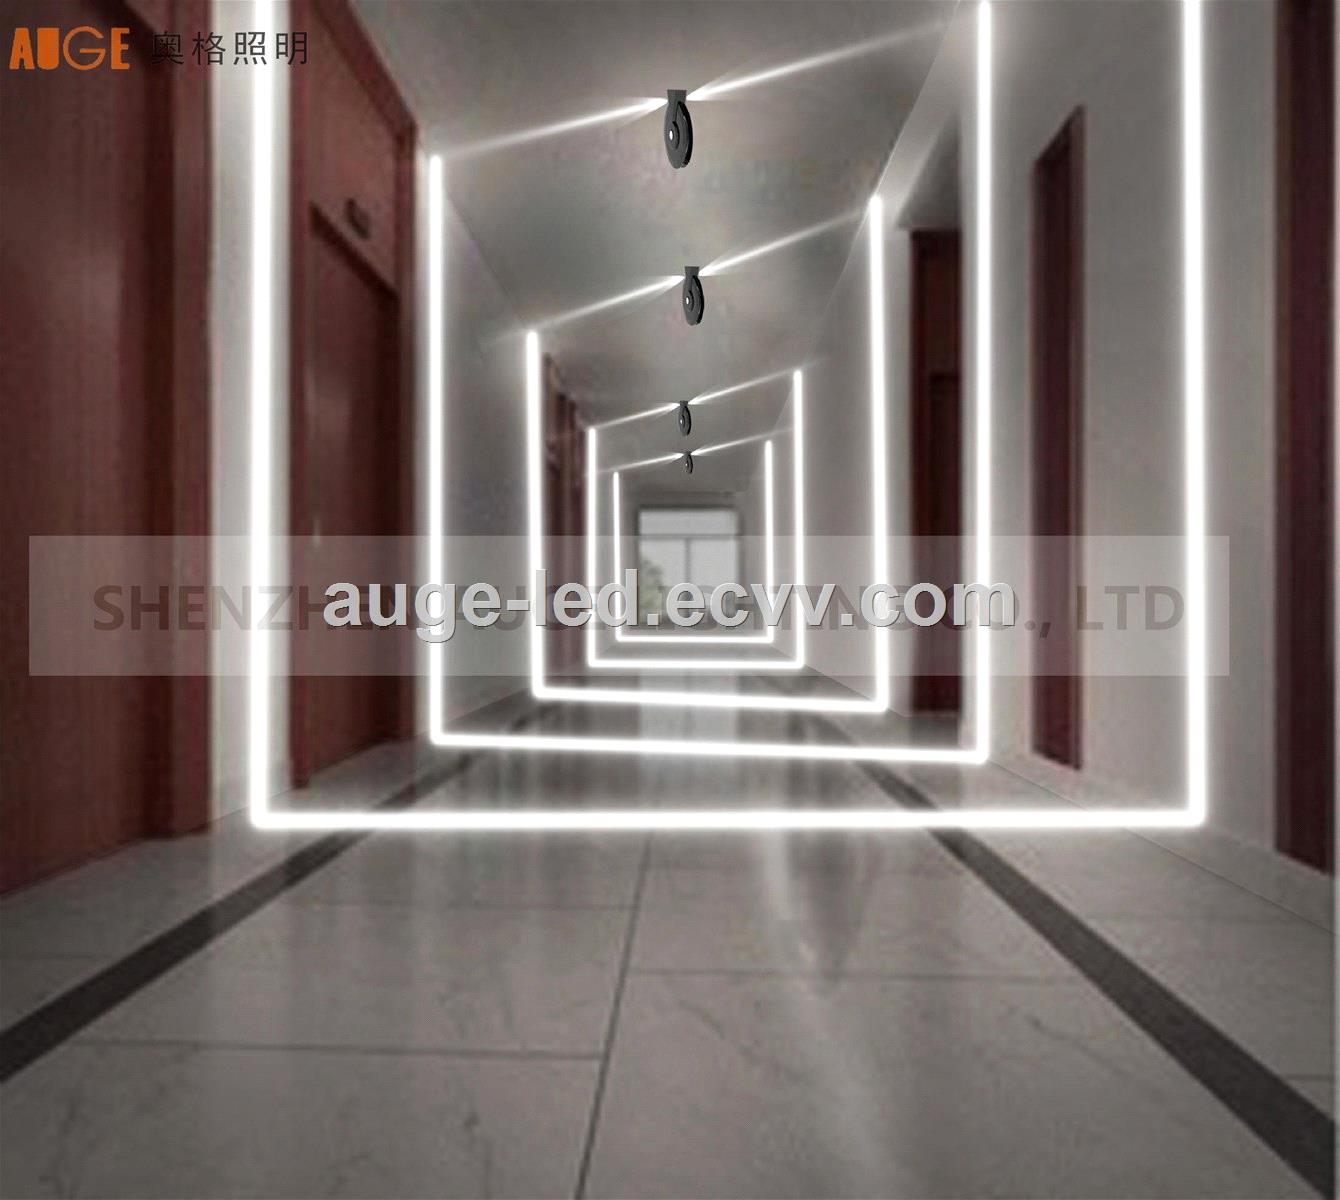 AUGEFIND 360deg led window lamp IP65 window lamp replace stripwall washer lightarchitectural outline decorative lamp